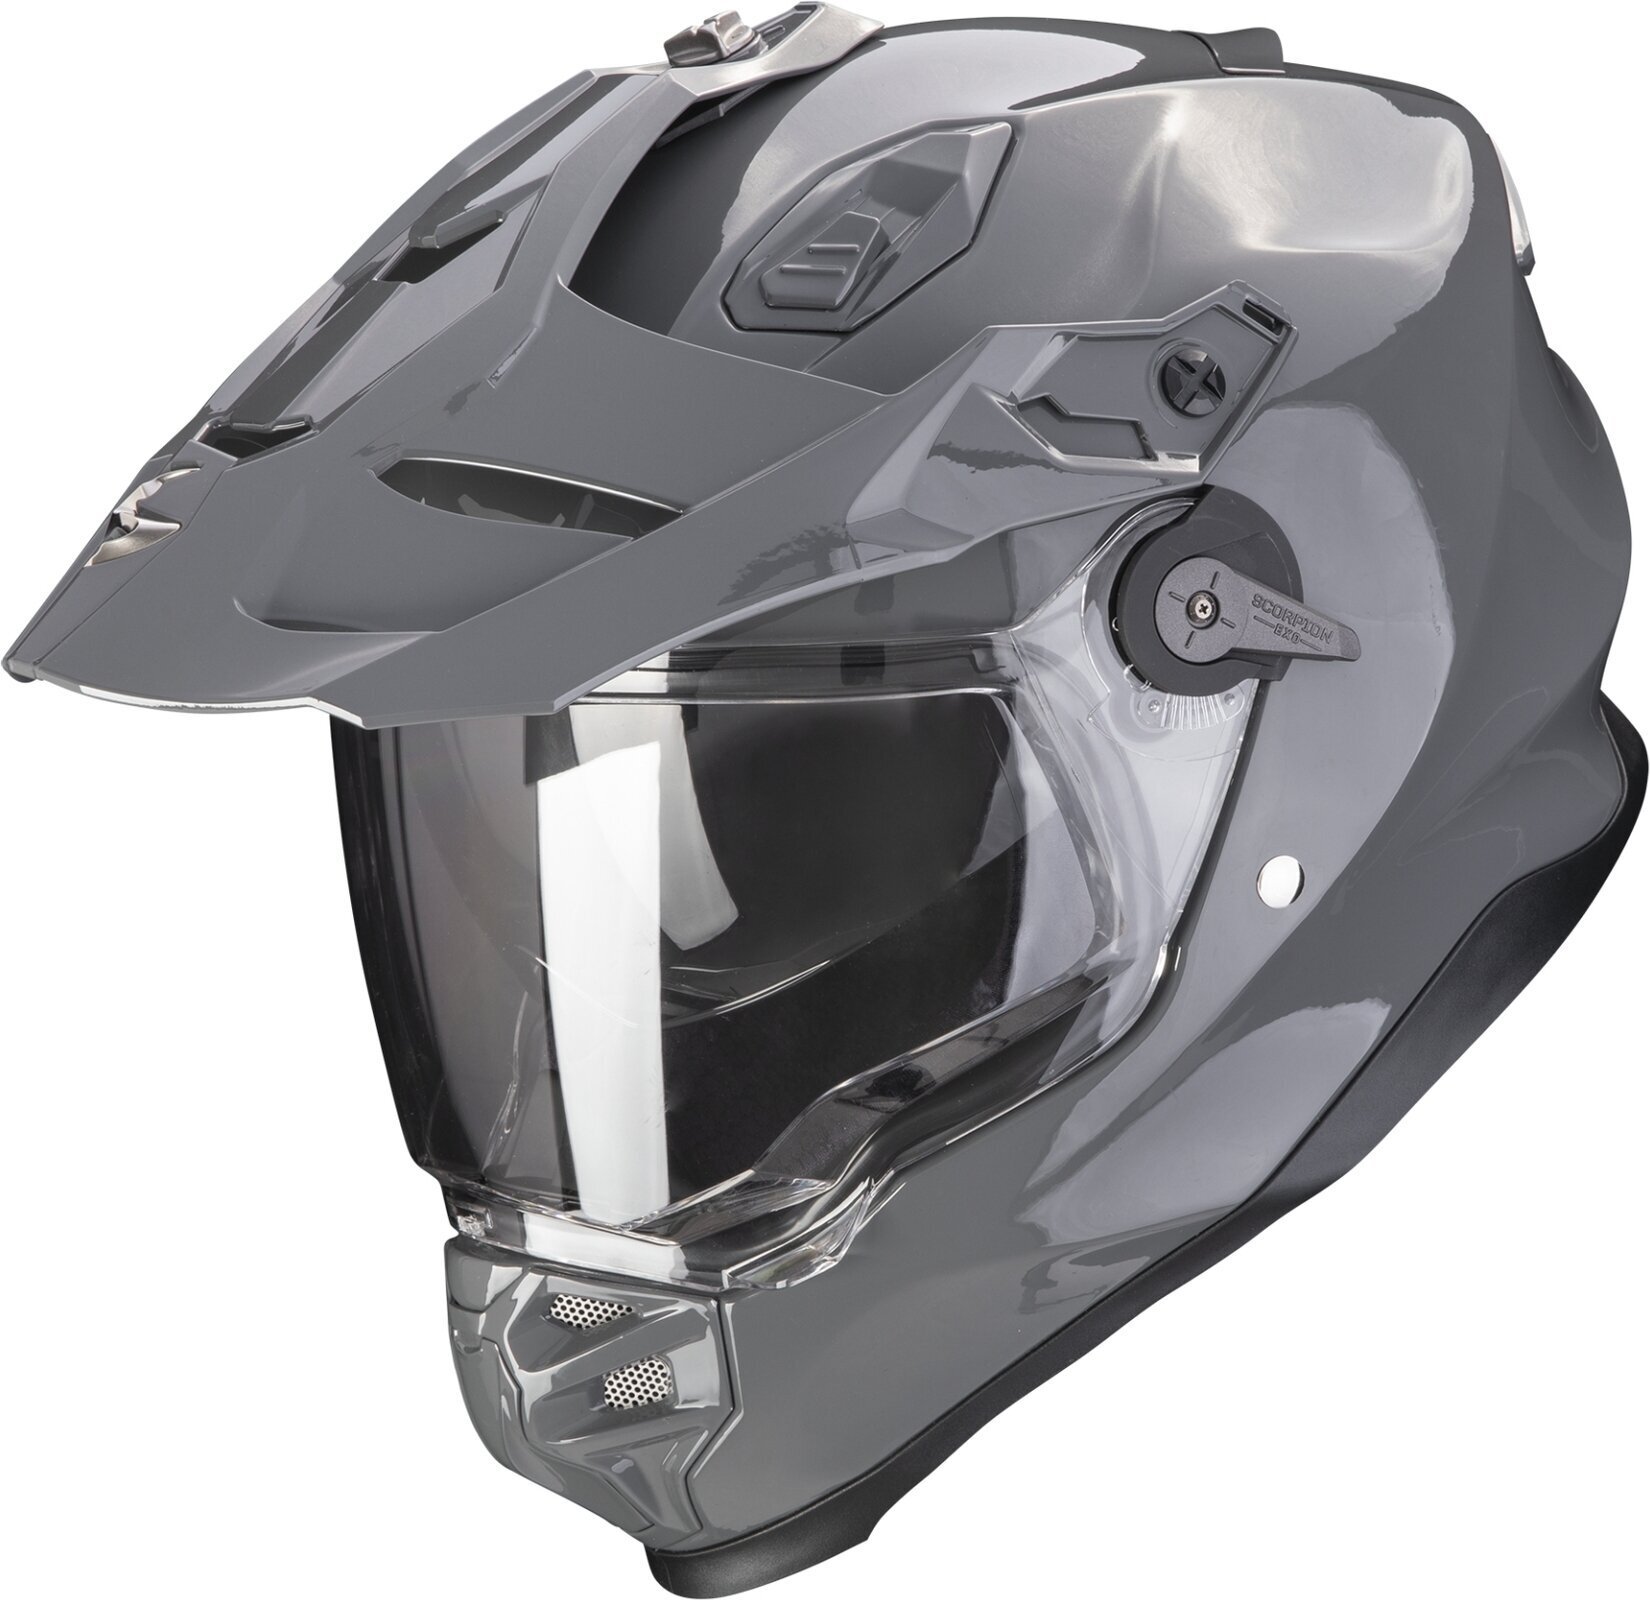 Casca Scorpion ADF-9000 AIR SOLID Cement Grey S Casca